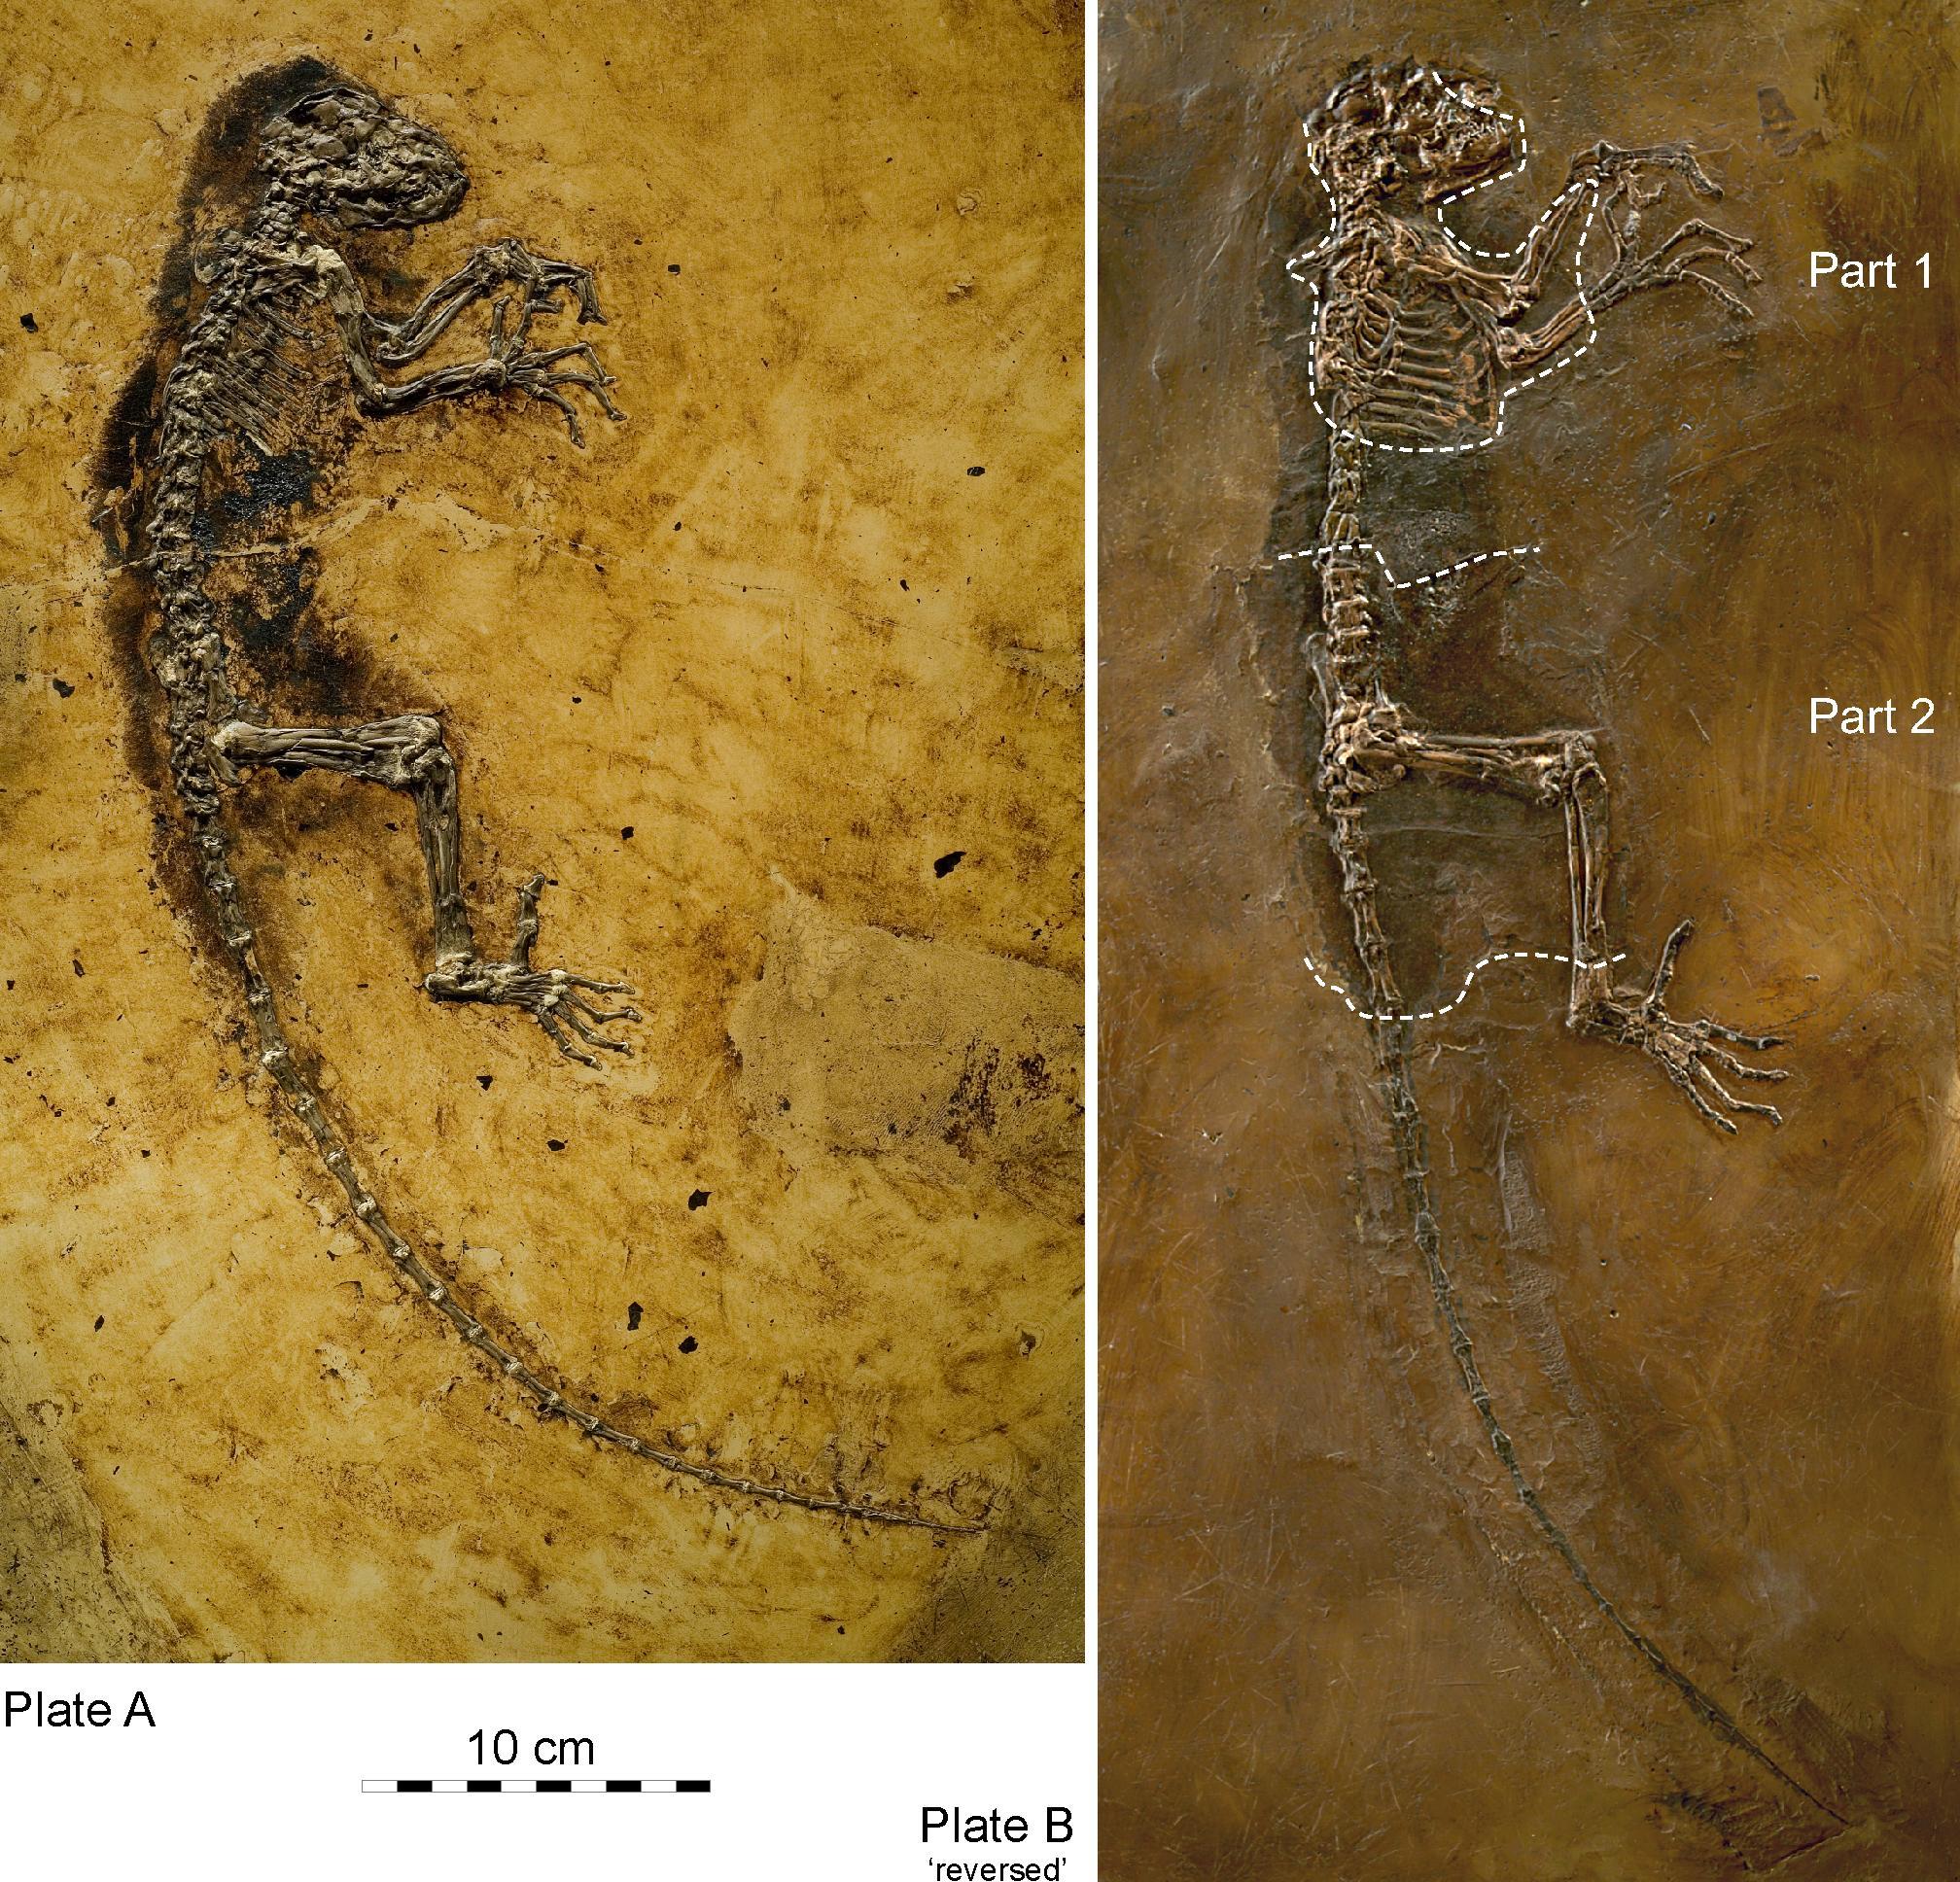 Side views of small rodentlike skeleton with long tail.